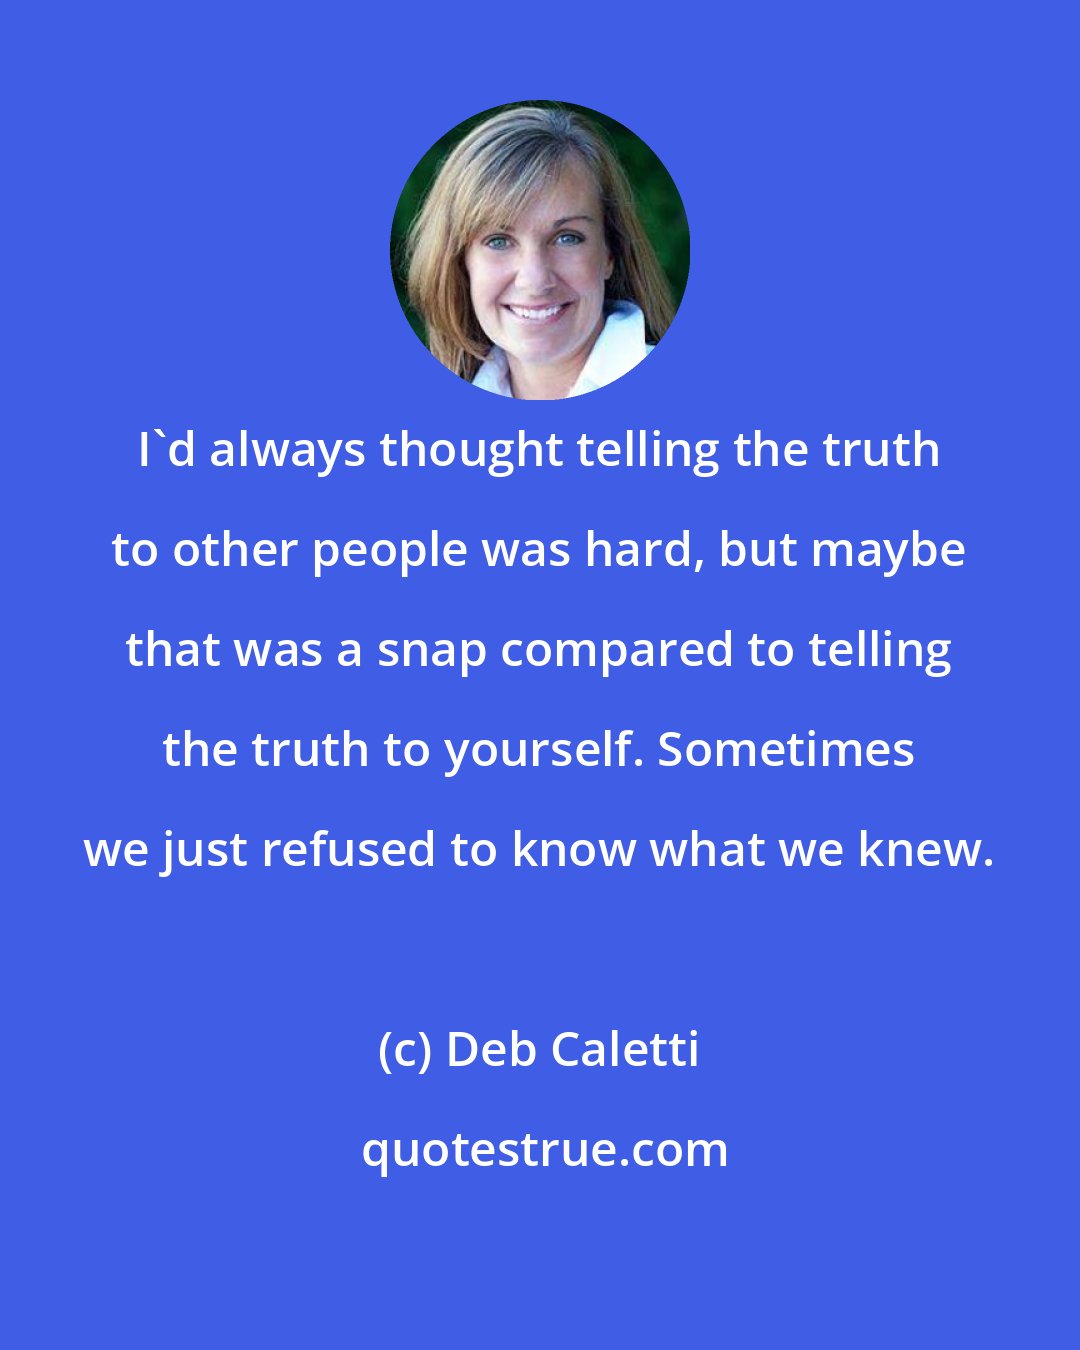 Deb Caletti: I'd always thought telling the truth to other people was hard, but maybe that was a snap compared to telling the truth to yourself. Sometimes we just refused to know what we knew.